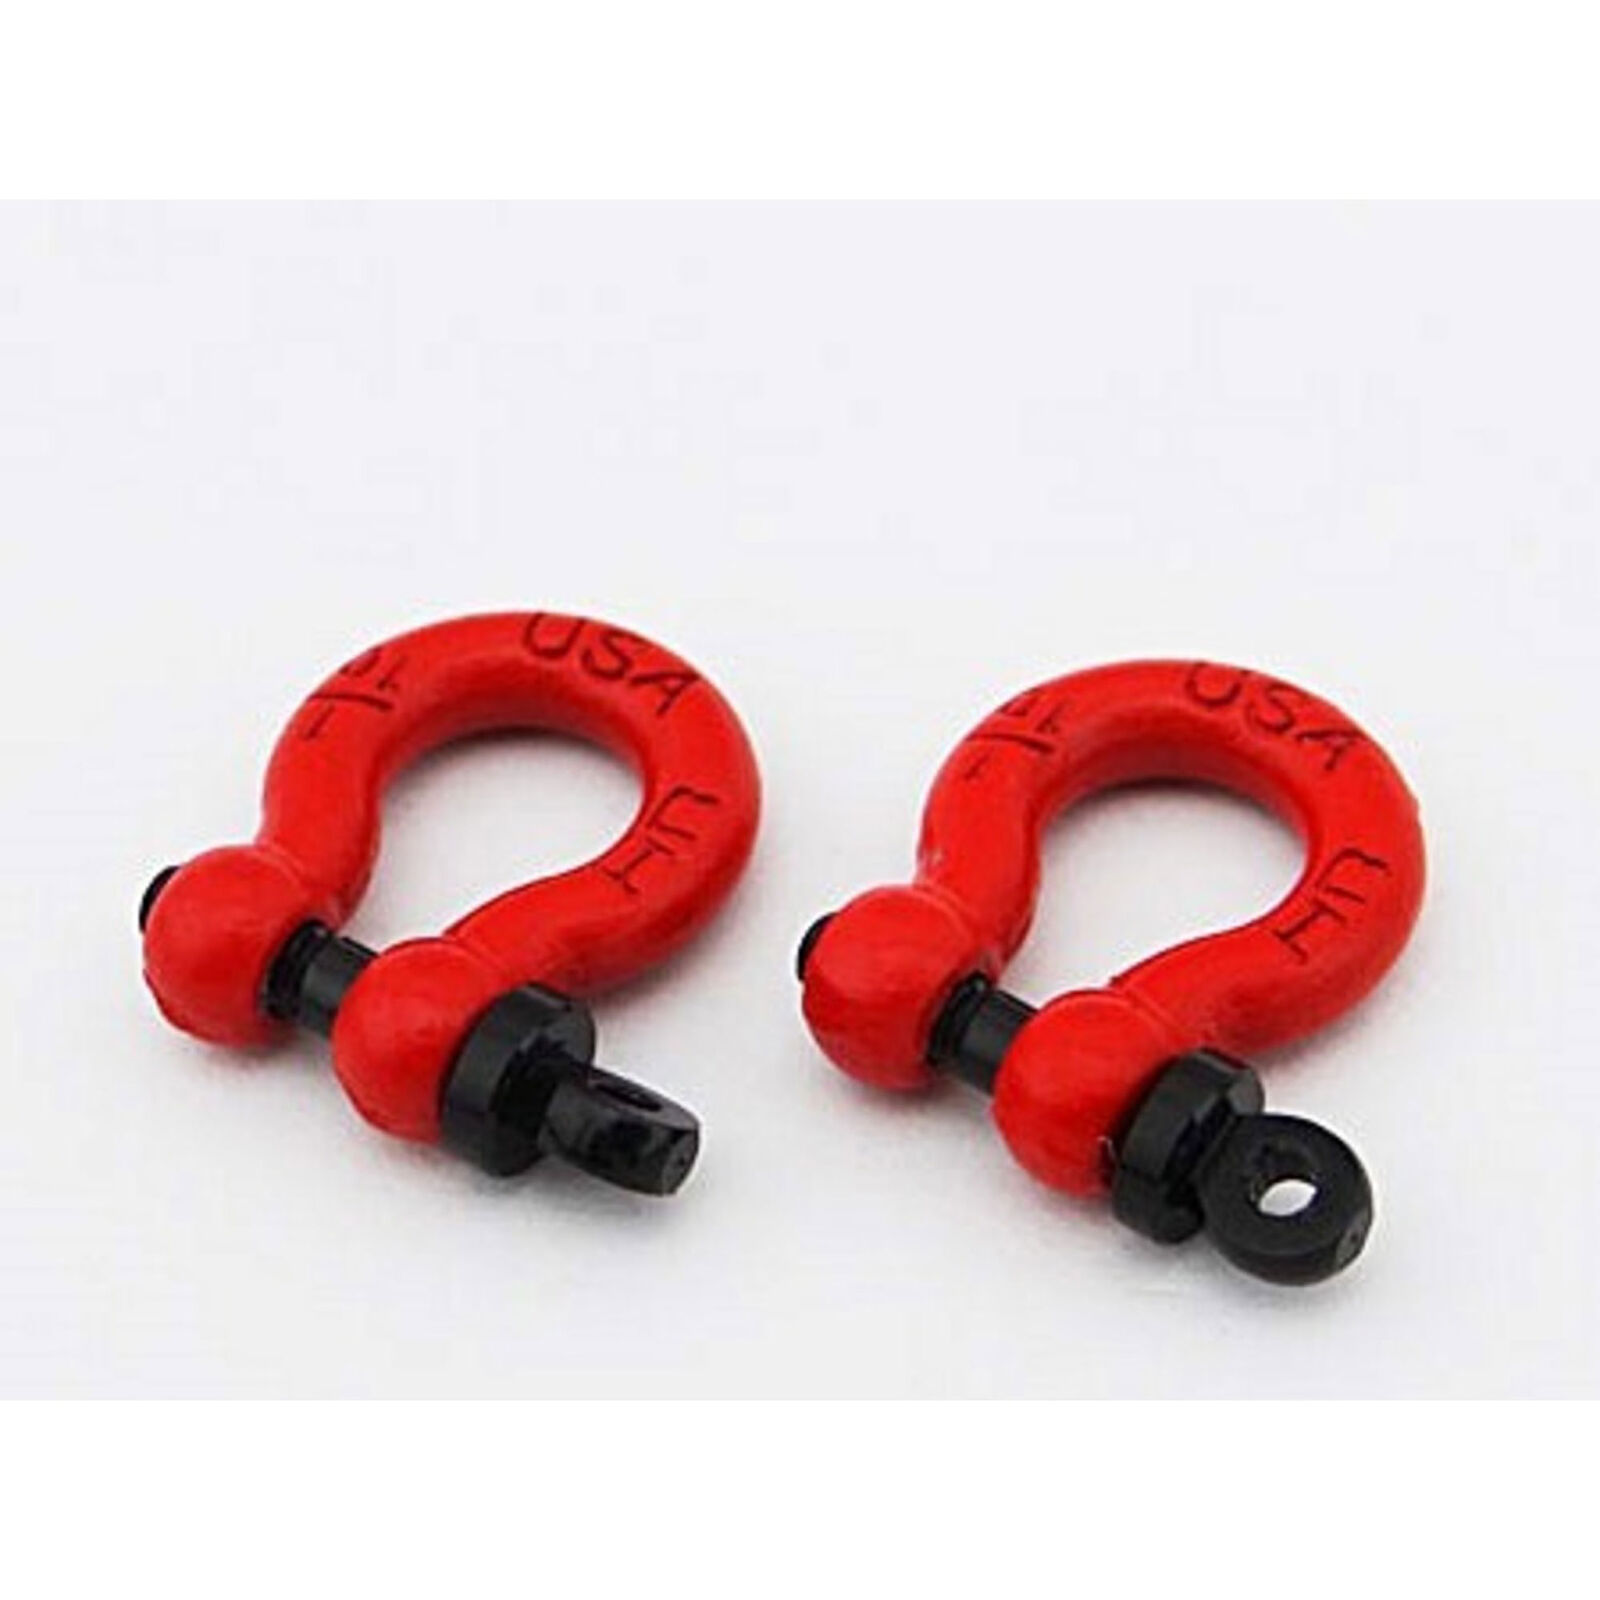 1/10 Scale Red Tow Shackle D-Rings (2)